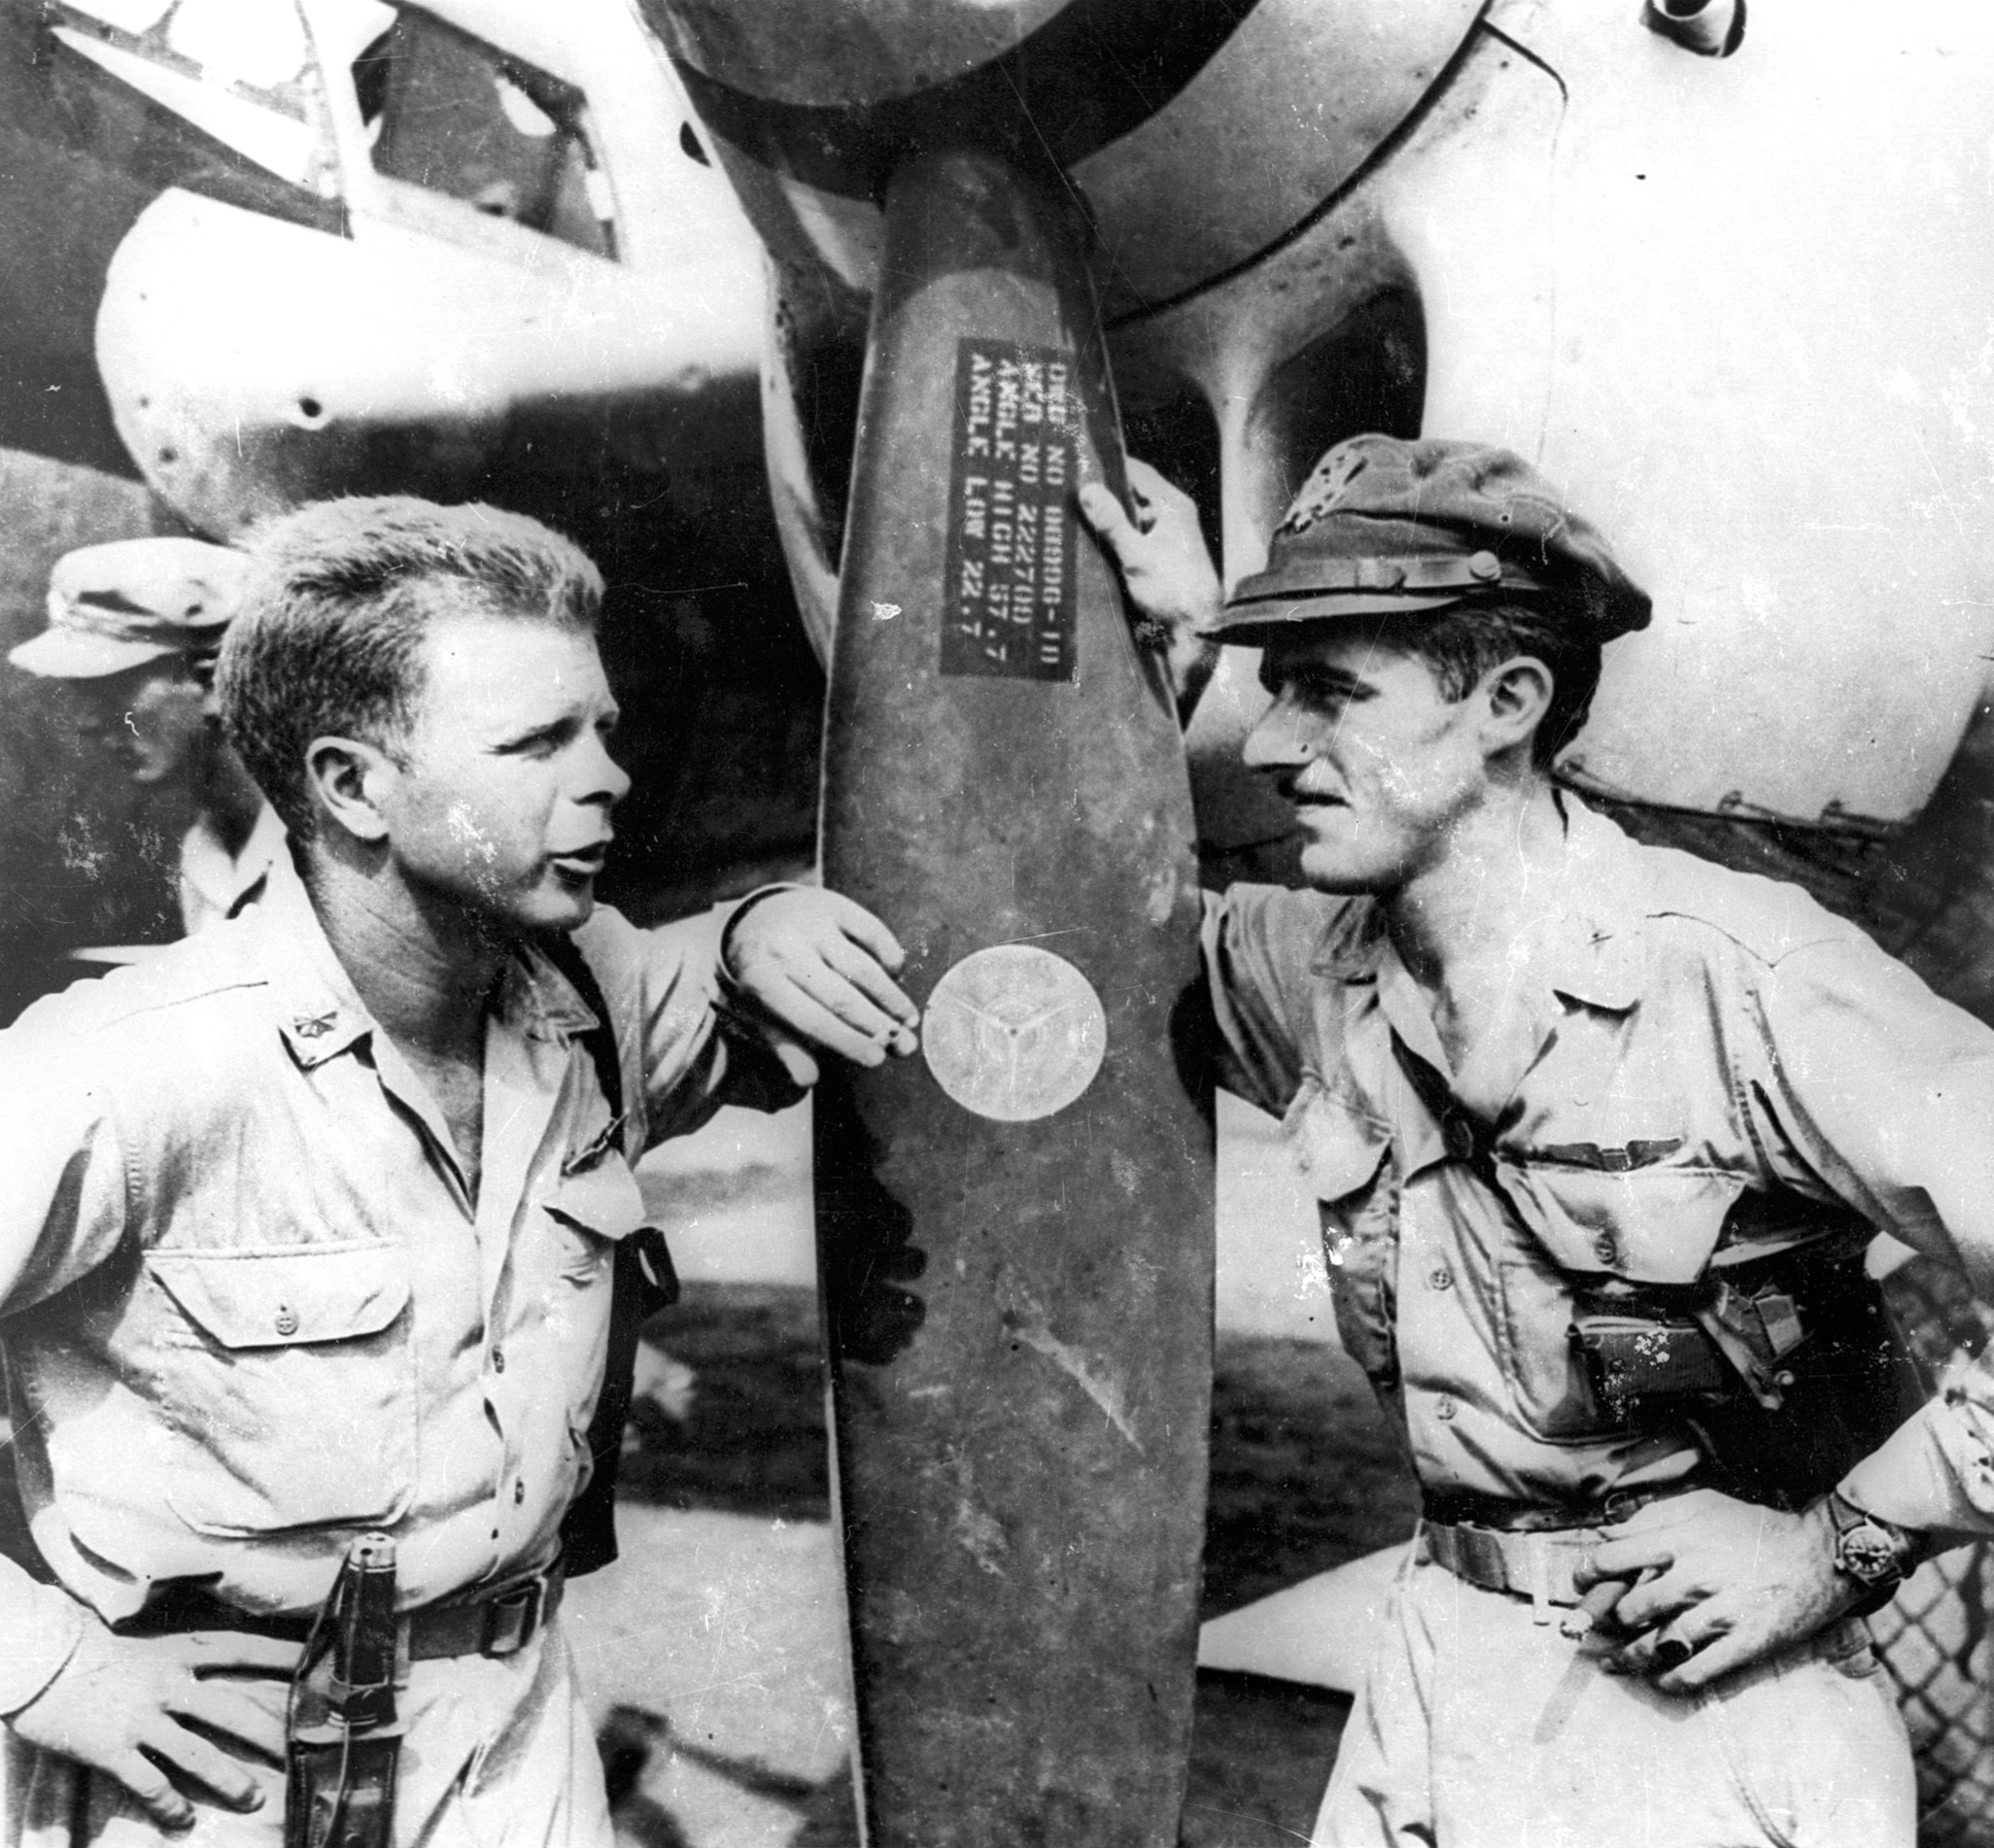 Majs. Thomas B. McGuire Jr. and Richard I. Bong on Nov. 15, 1944, in the Philippines. Majs. Bong and McGuire were the top two scoring U.S. aces in World War II with 40 and 38 victories, respectively. (U.S. Air Force photo)